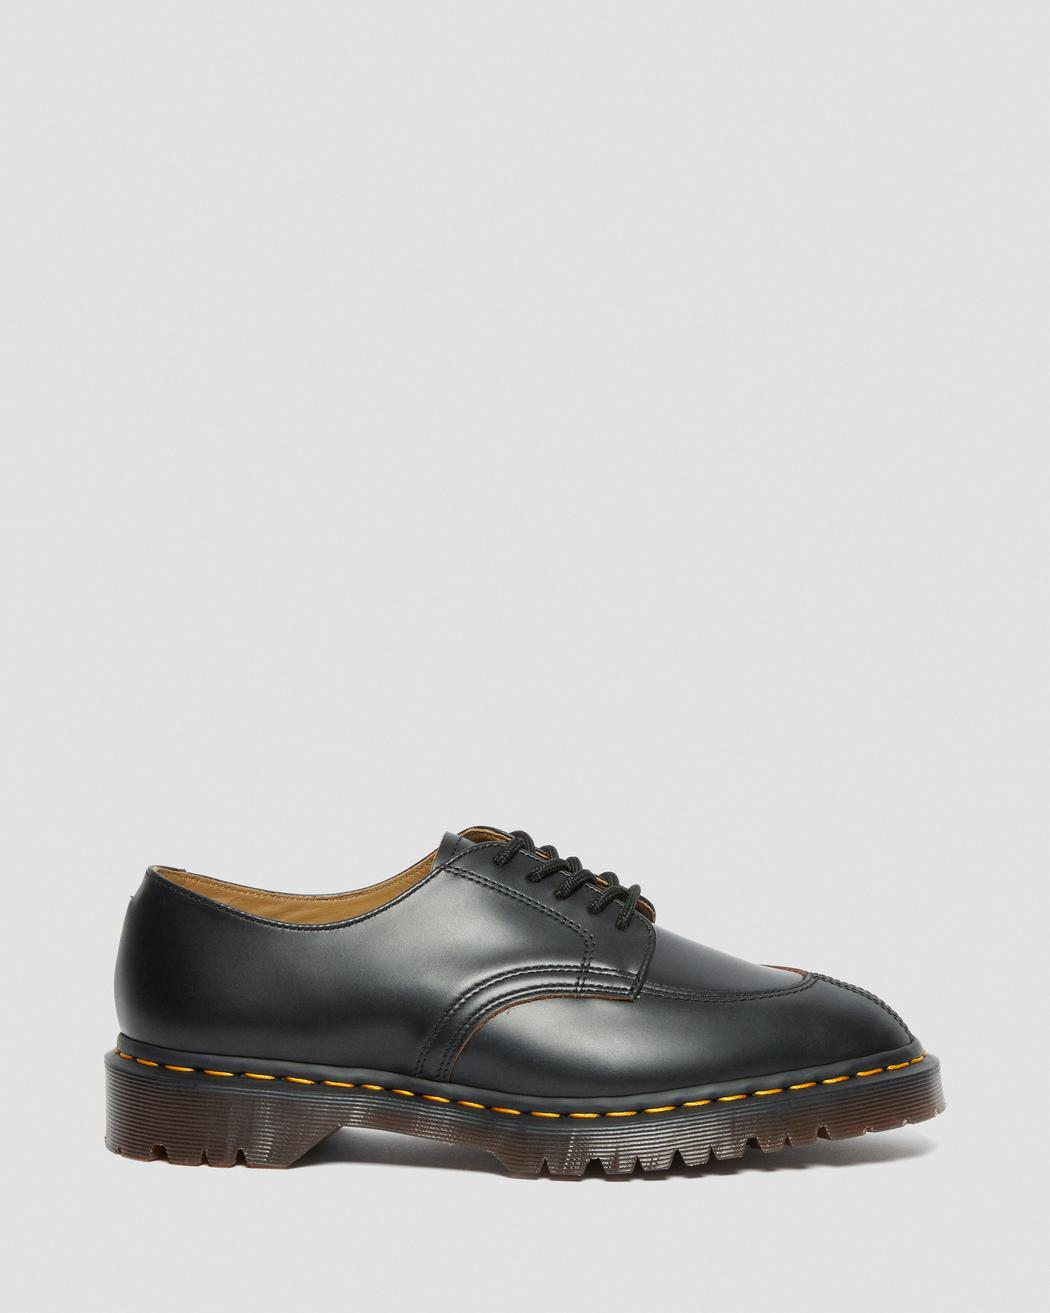 2046 VINTAGE SMOOTH LEATHER OXFORD SHOES – Posers Hollywood